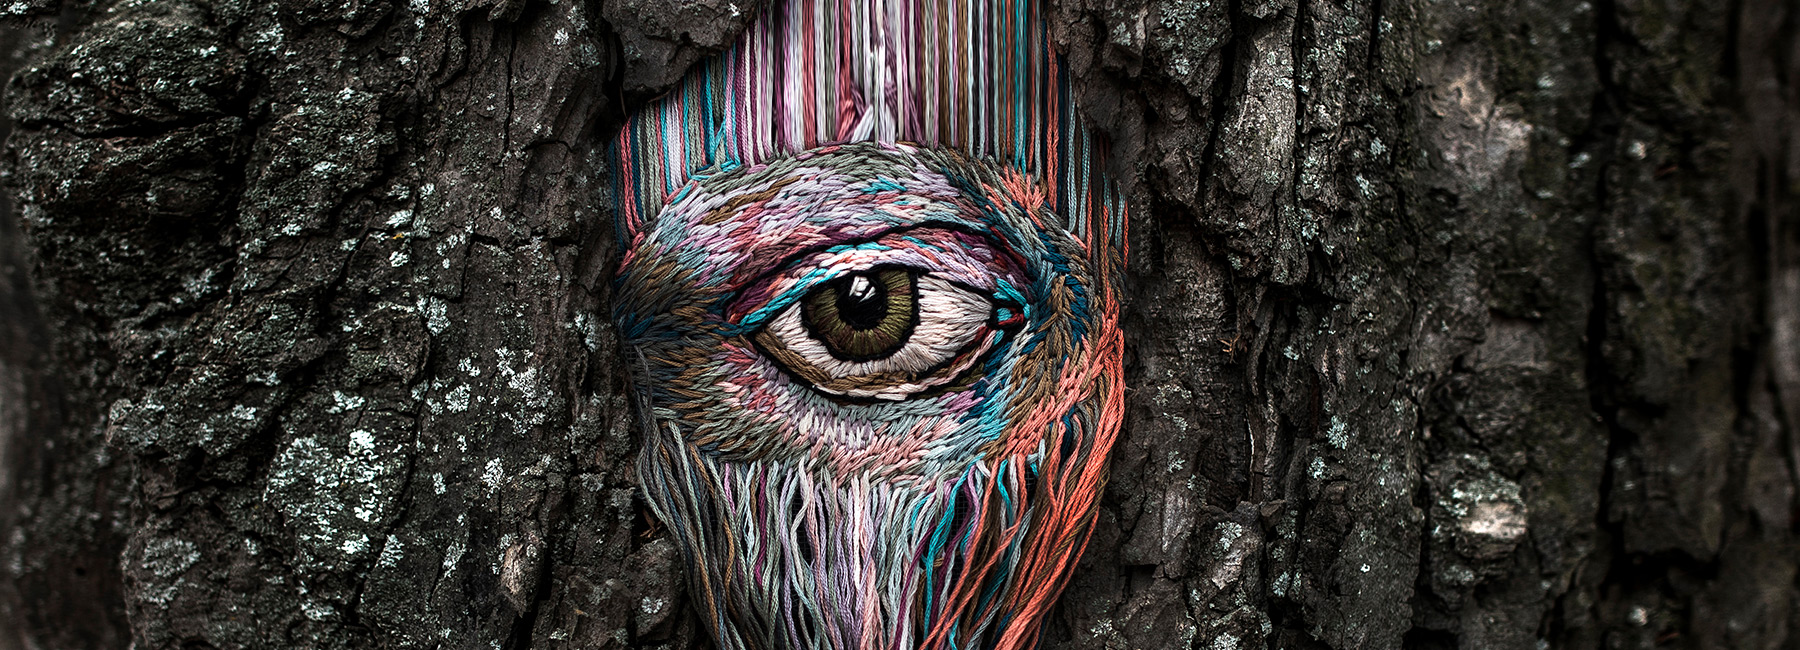 diana yevtukh 'heals' scarred trees with intricate embroidered artworks